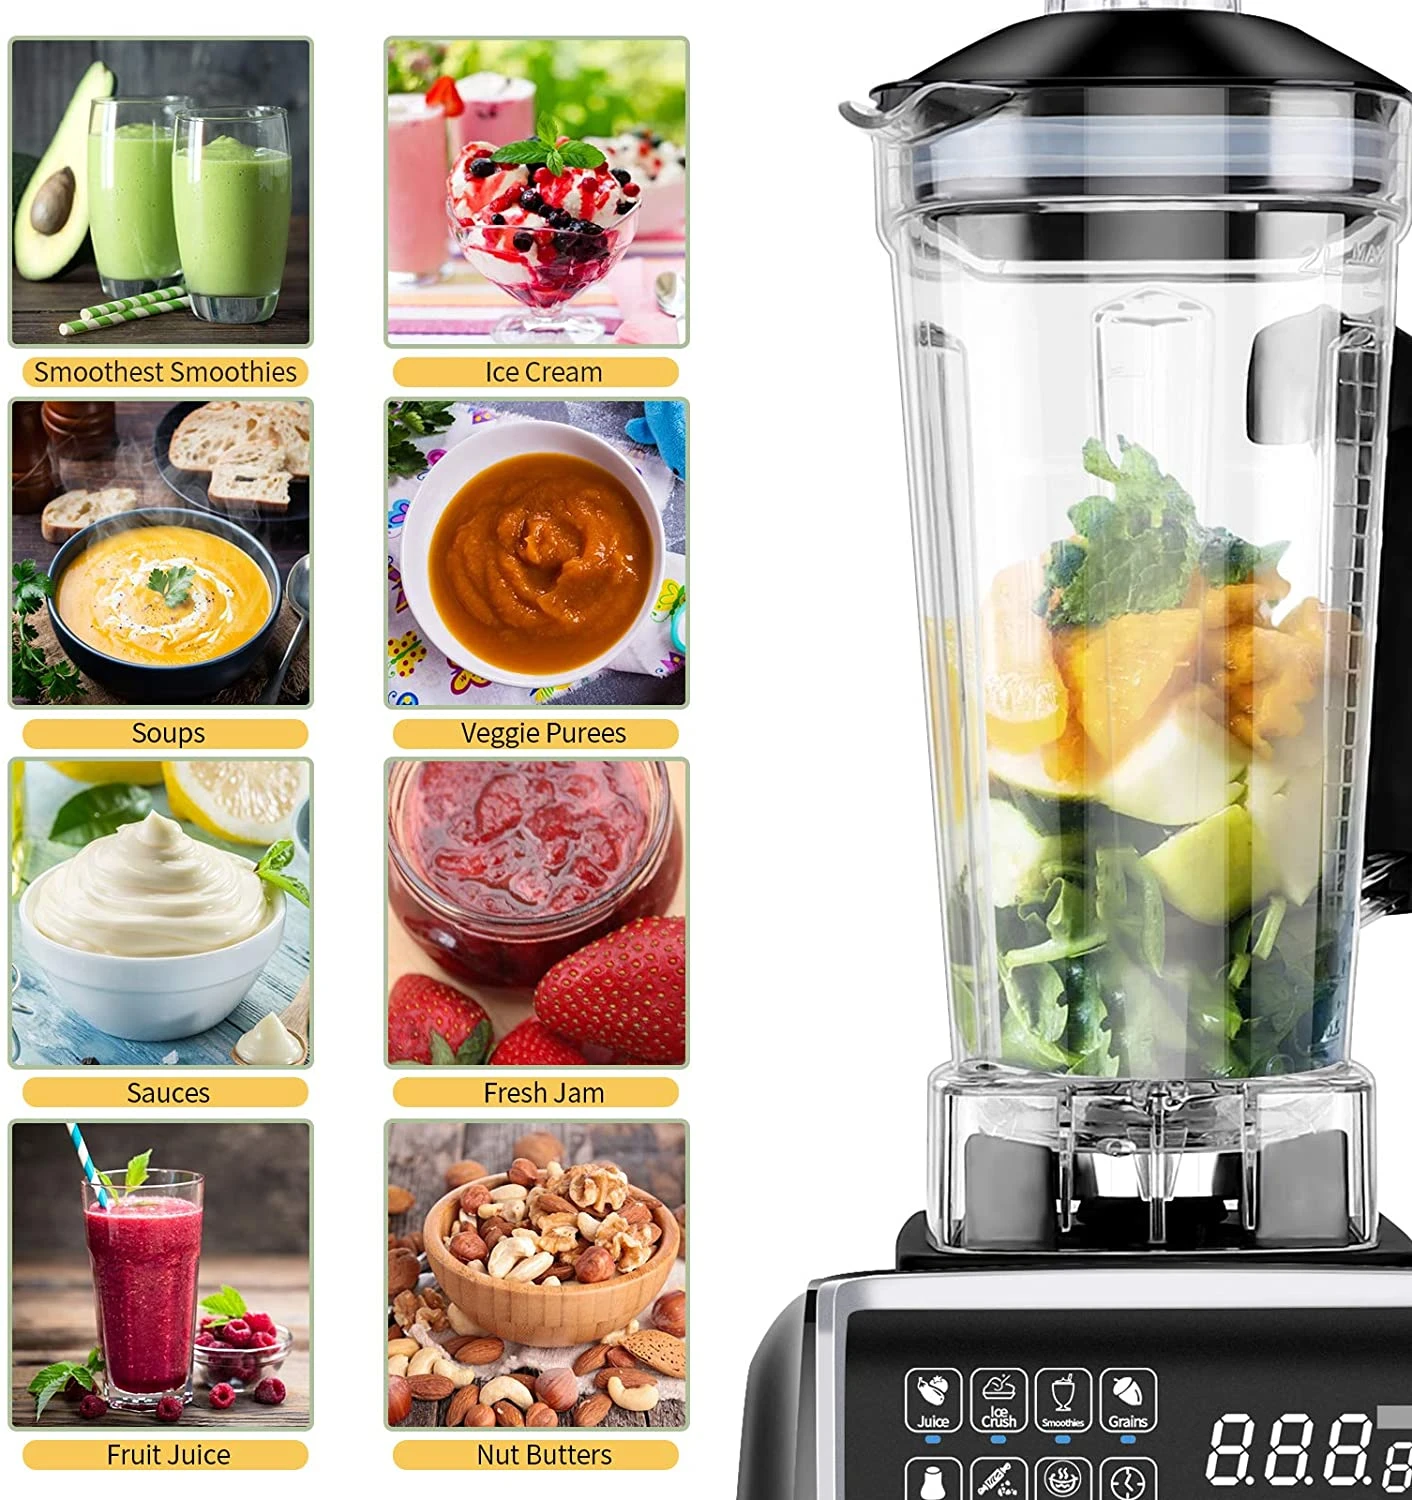 NEW Design Beauty blender juicer grinder Commercial Food Mixing Heavy Duty Fully Automatic Blender